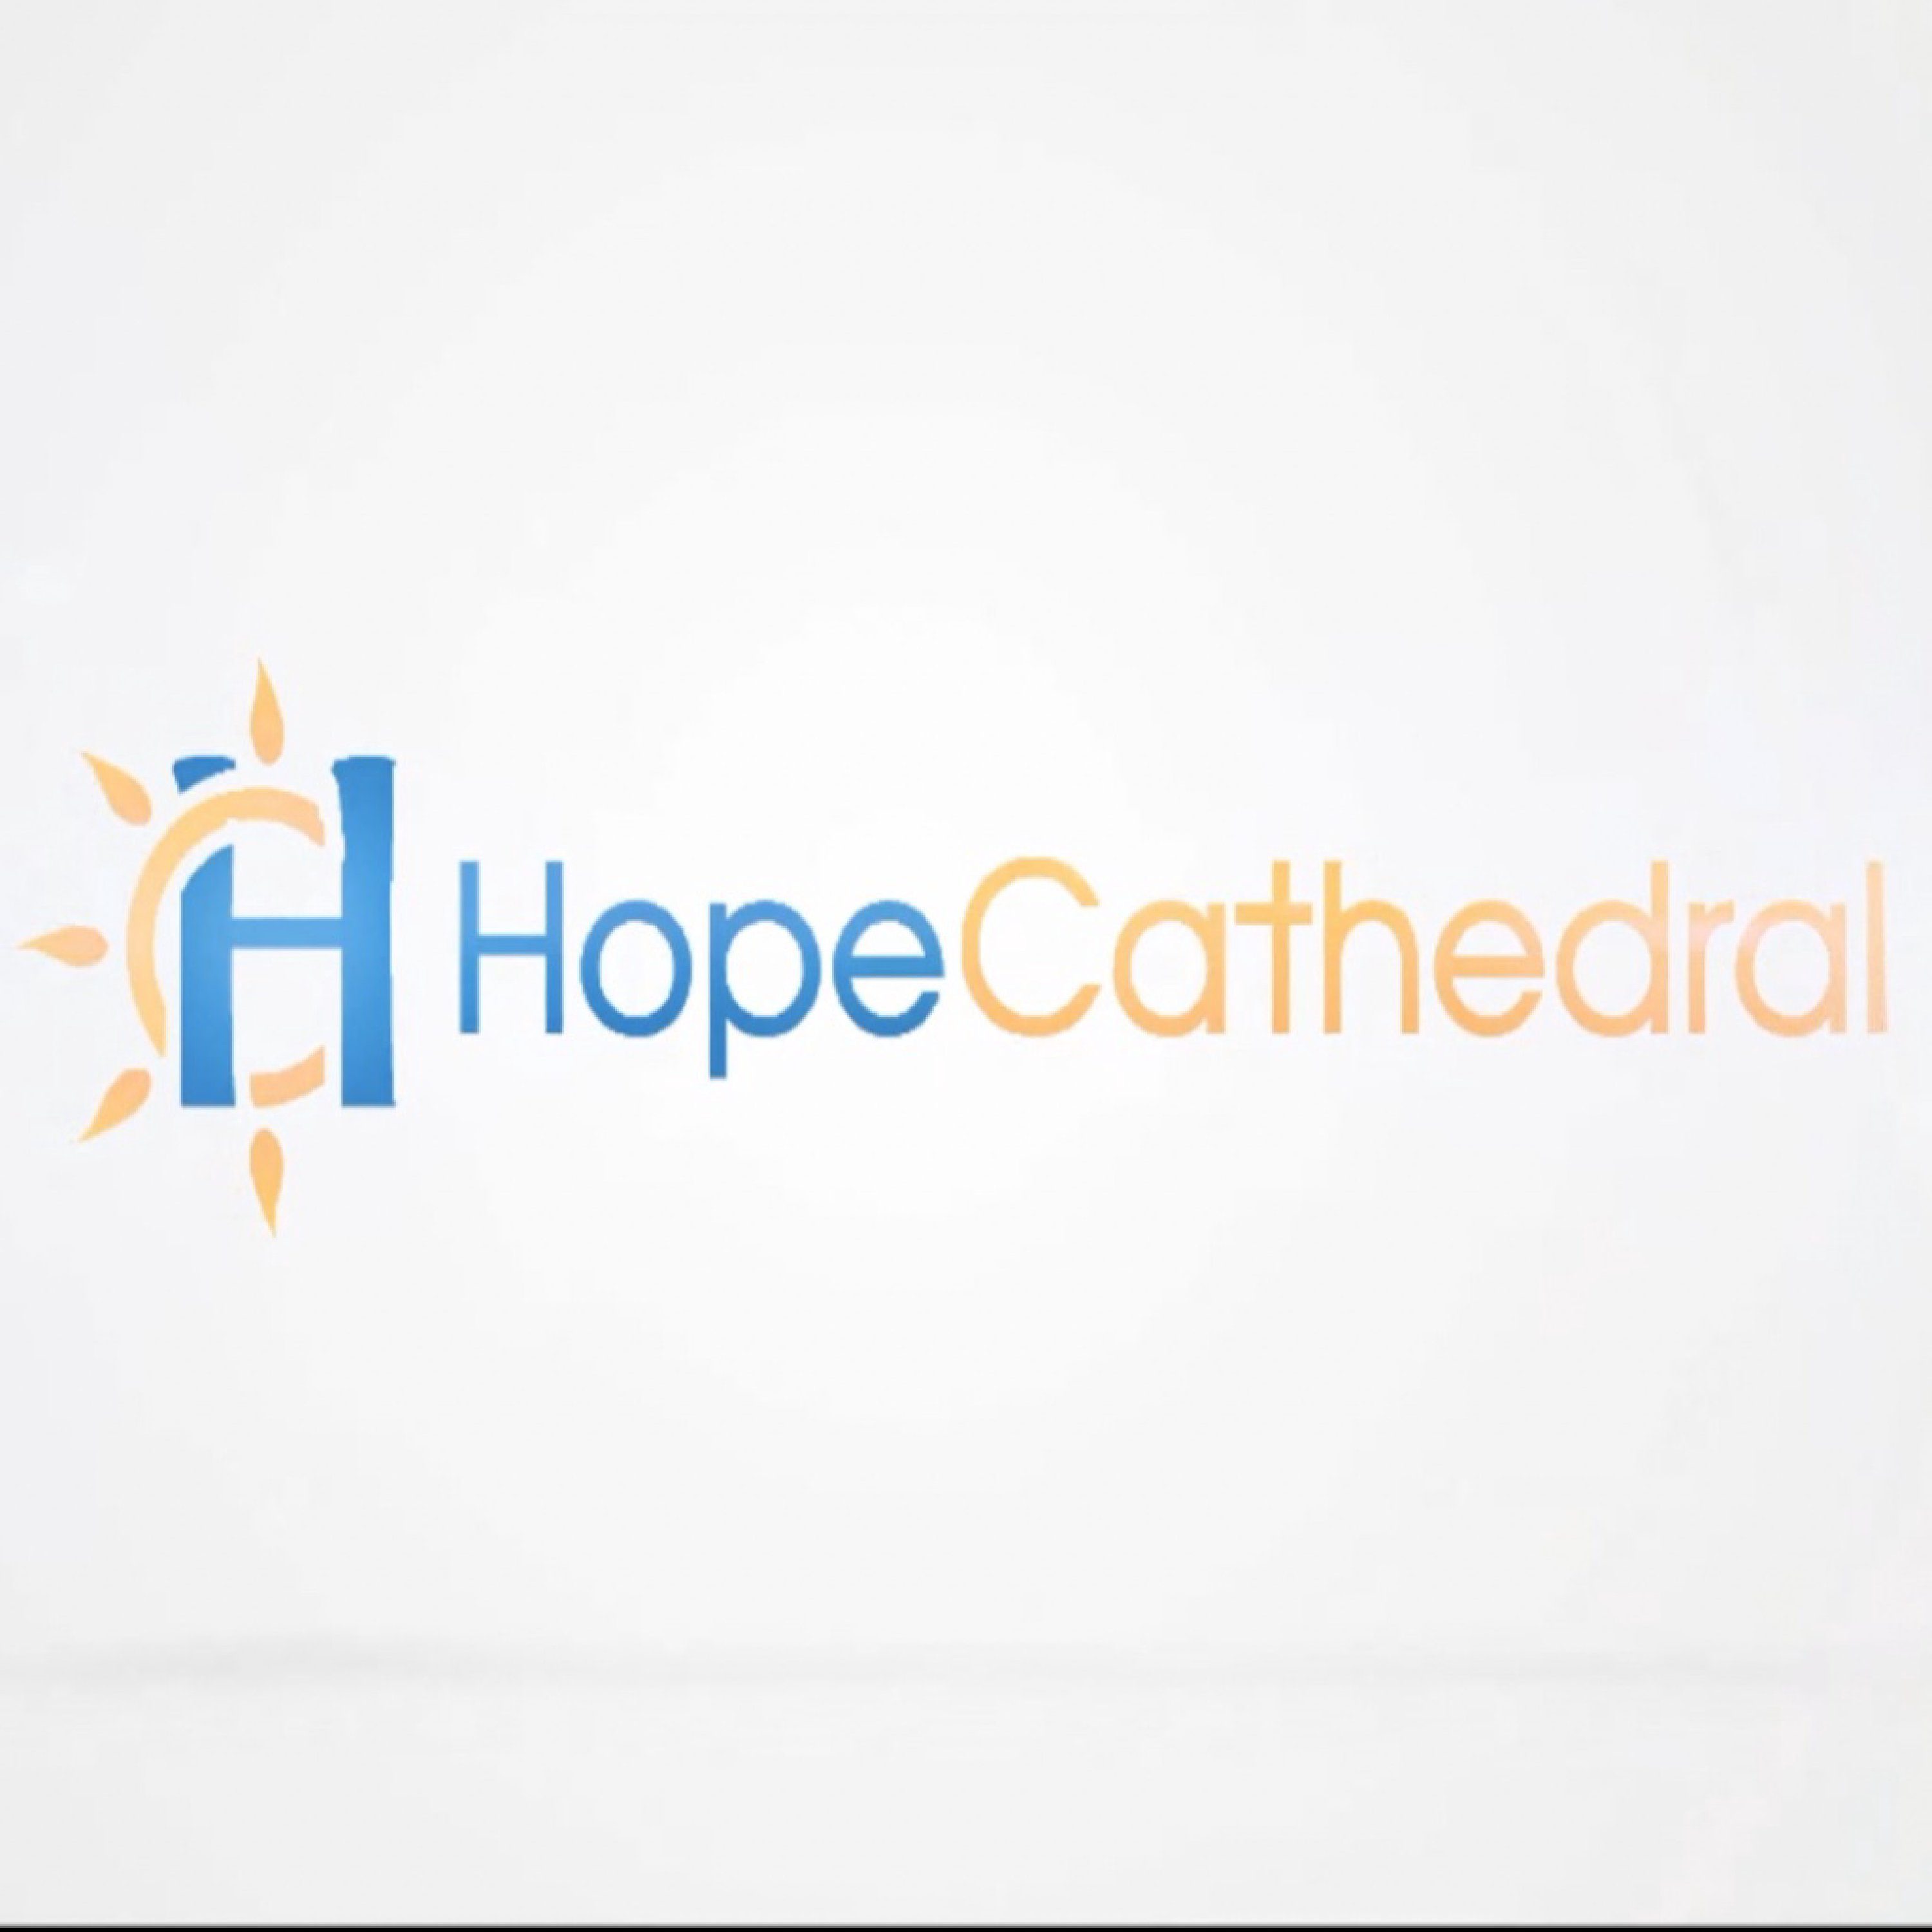 Hope Cathedral